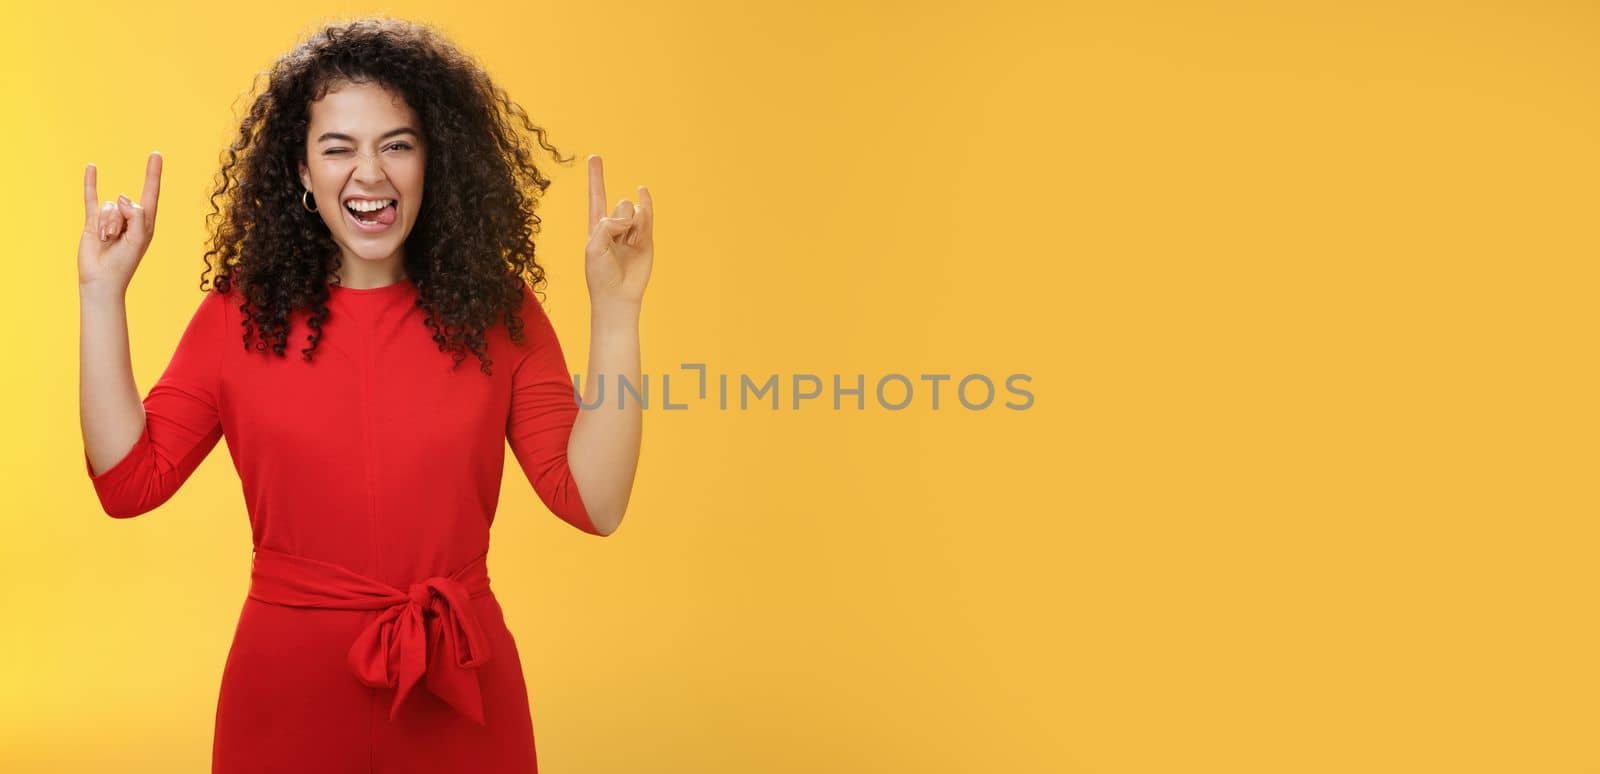 Lifestyle. Cute excied and daring woman in 25s sticking out tongue as fooling around having fun on concert winking joyfully and showing rock-n-roll gesture feeling amused and alive over yellow background.